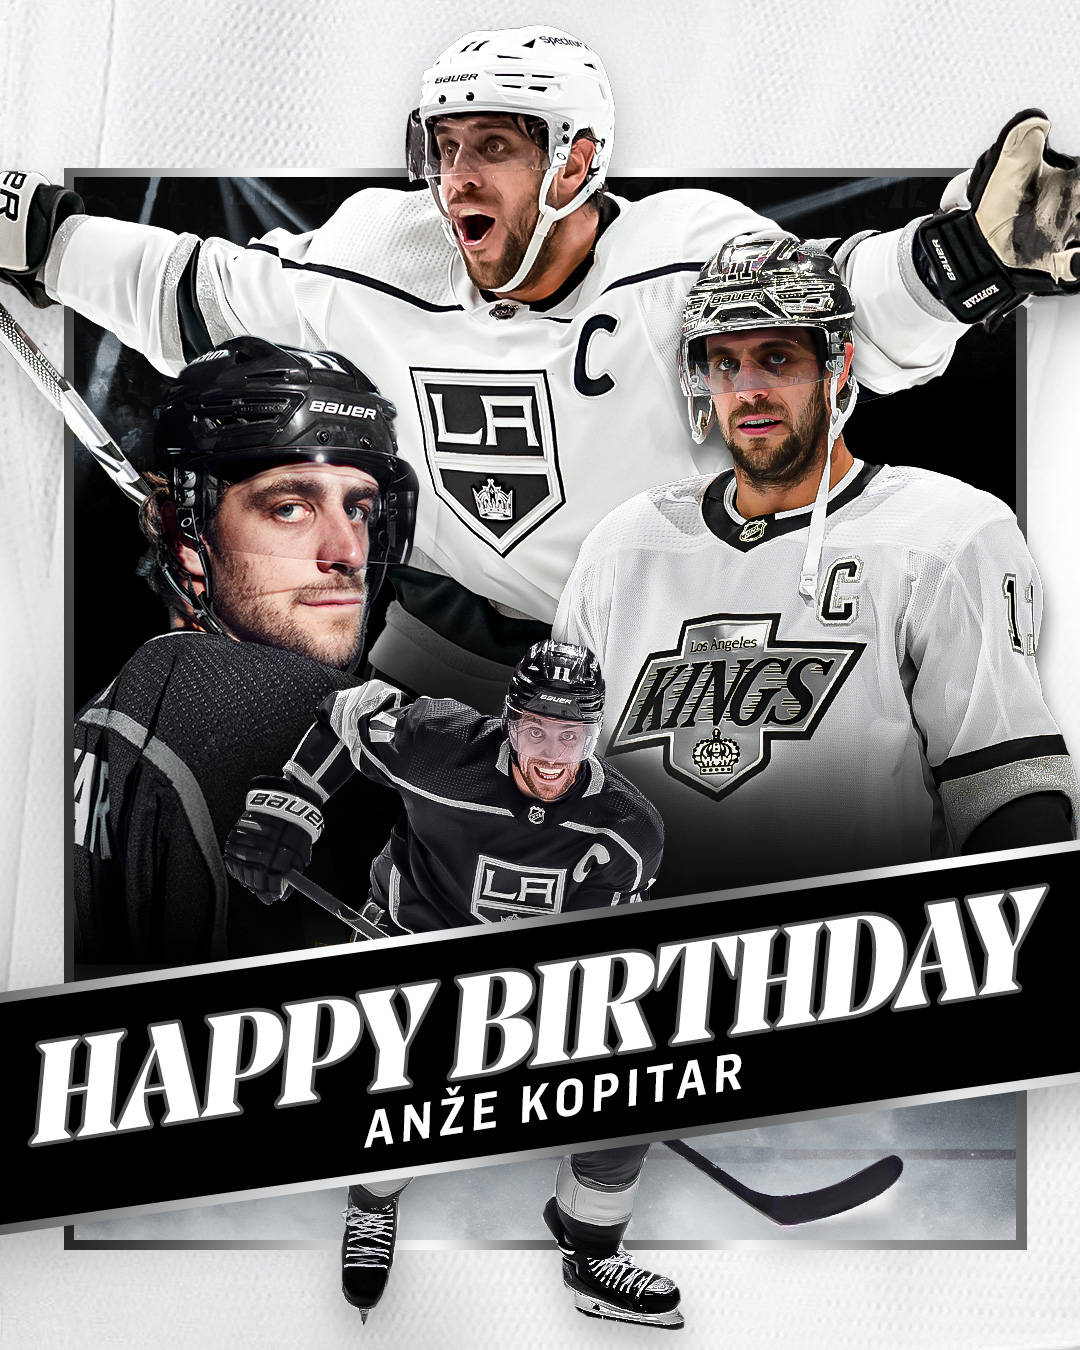 Download Anze Kopitar in action for Los Angeles Kings Wallpaper